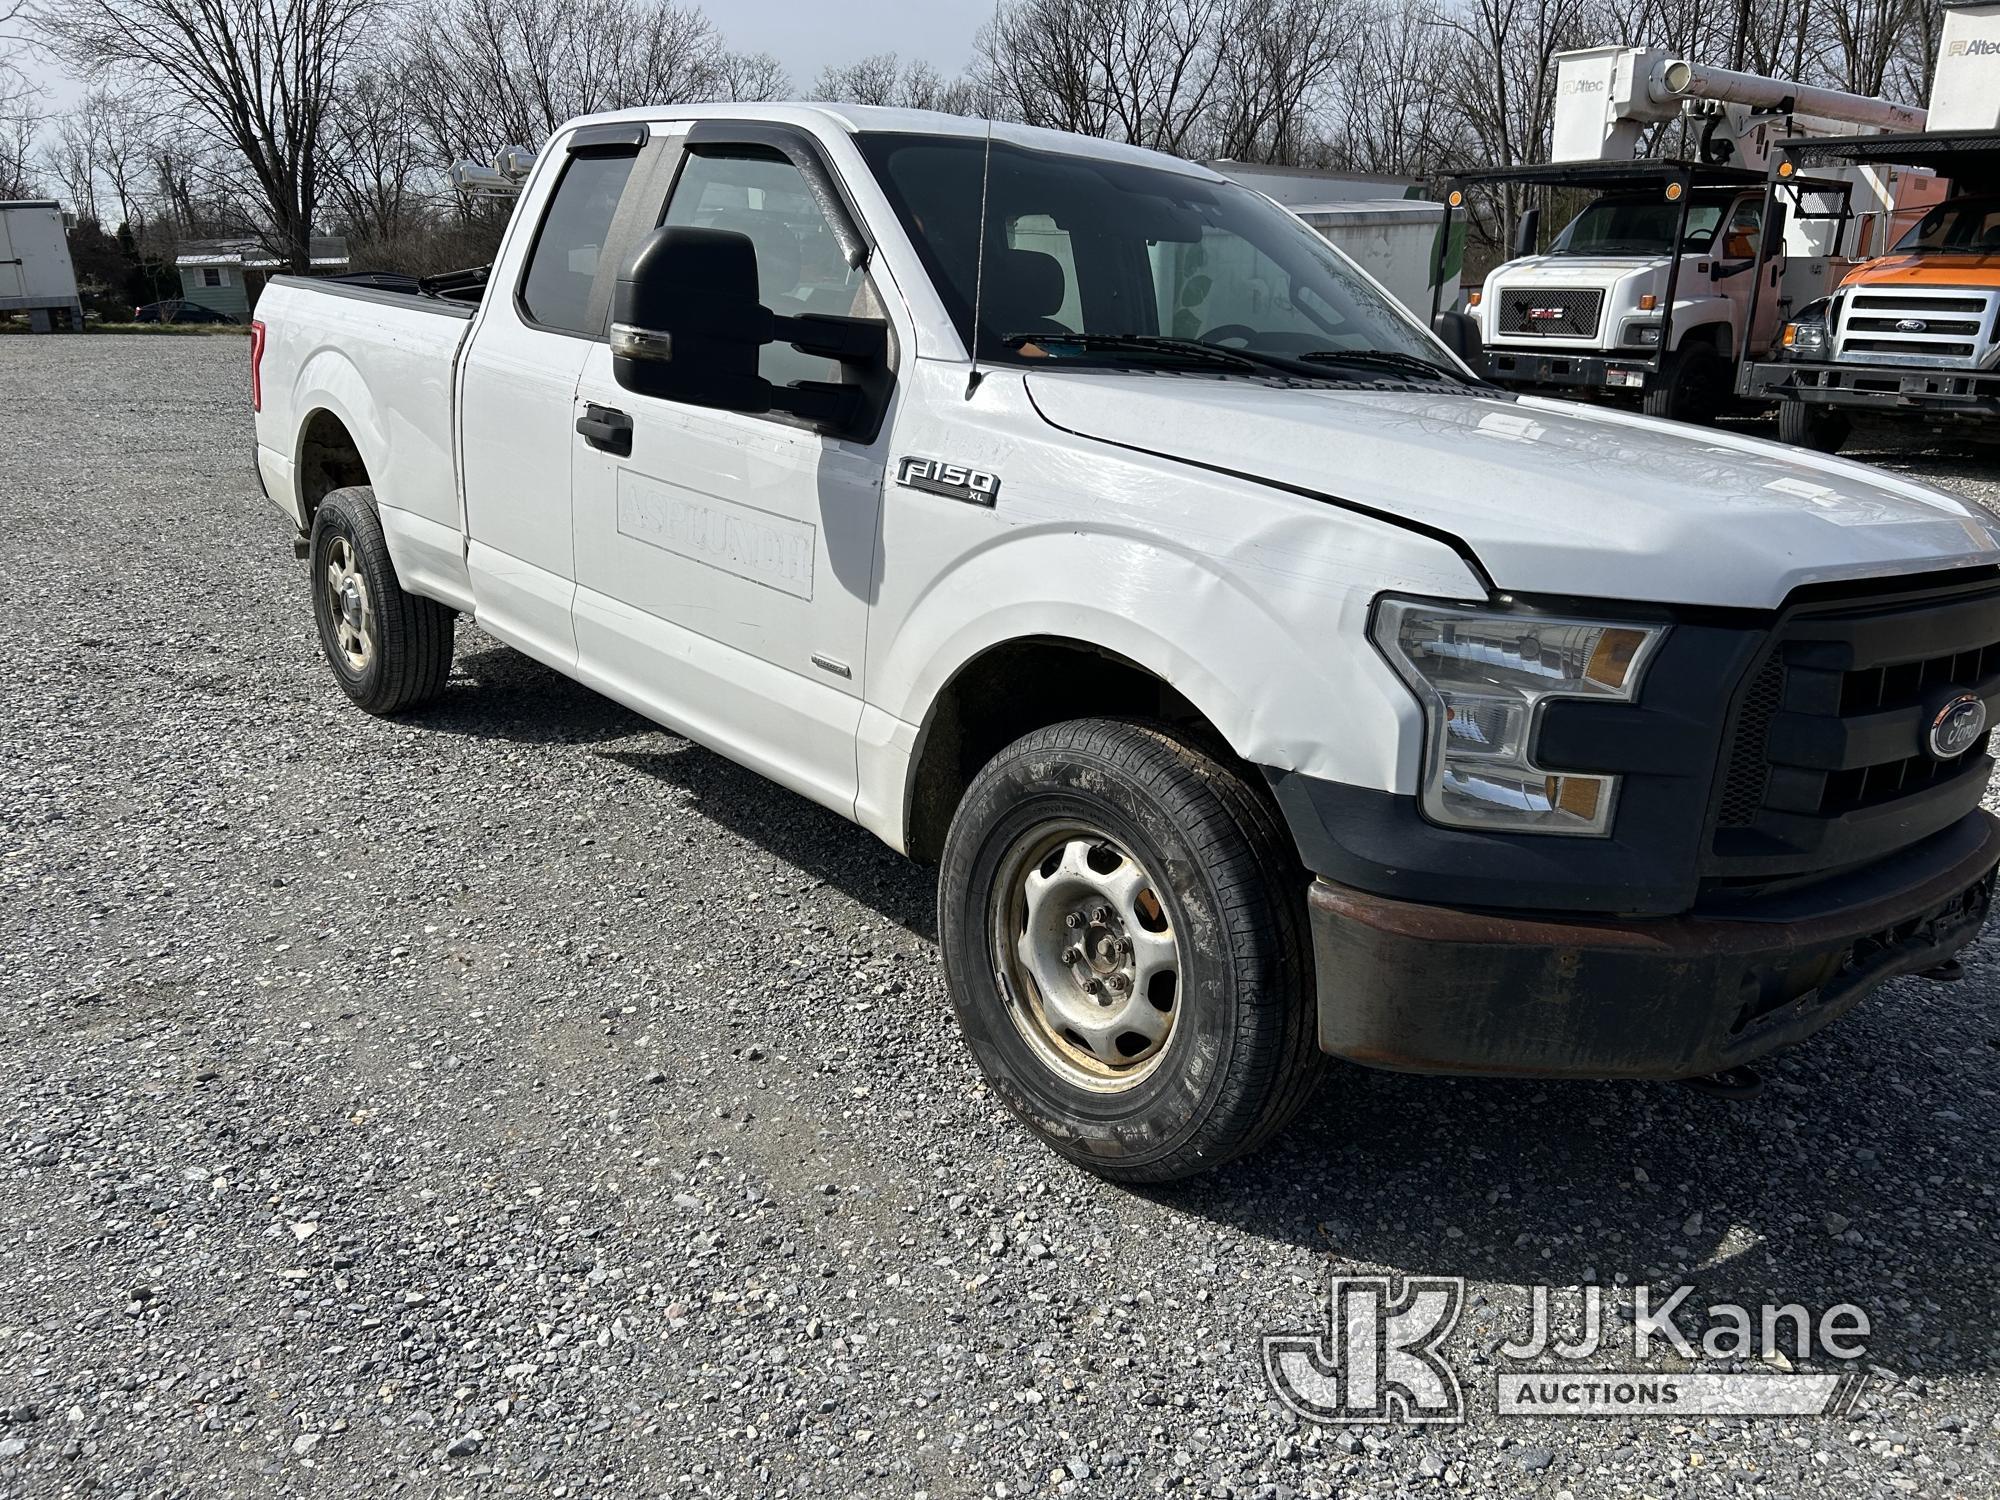 (Hagerstown, MD) 2016 Ford F150 4x4 Extended-Cab Pickup Truck Runs, Flat Tires, Rust & Body Damage,